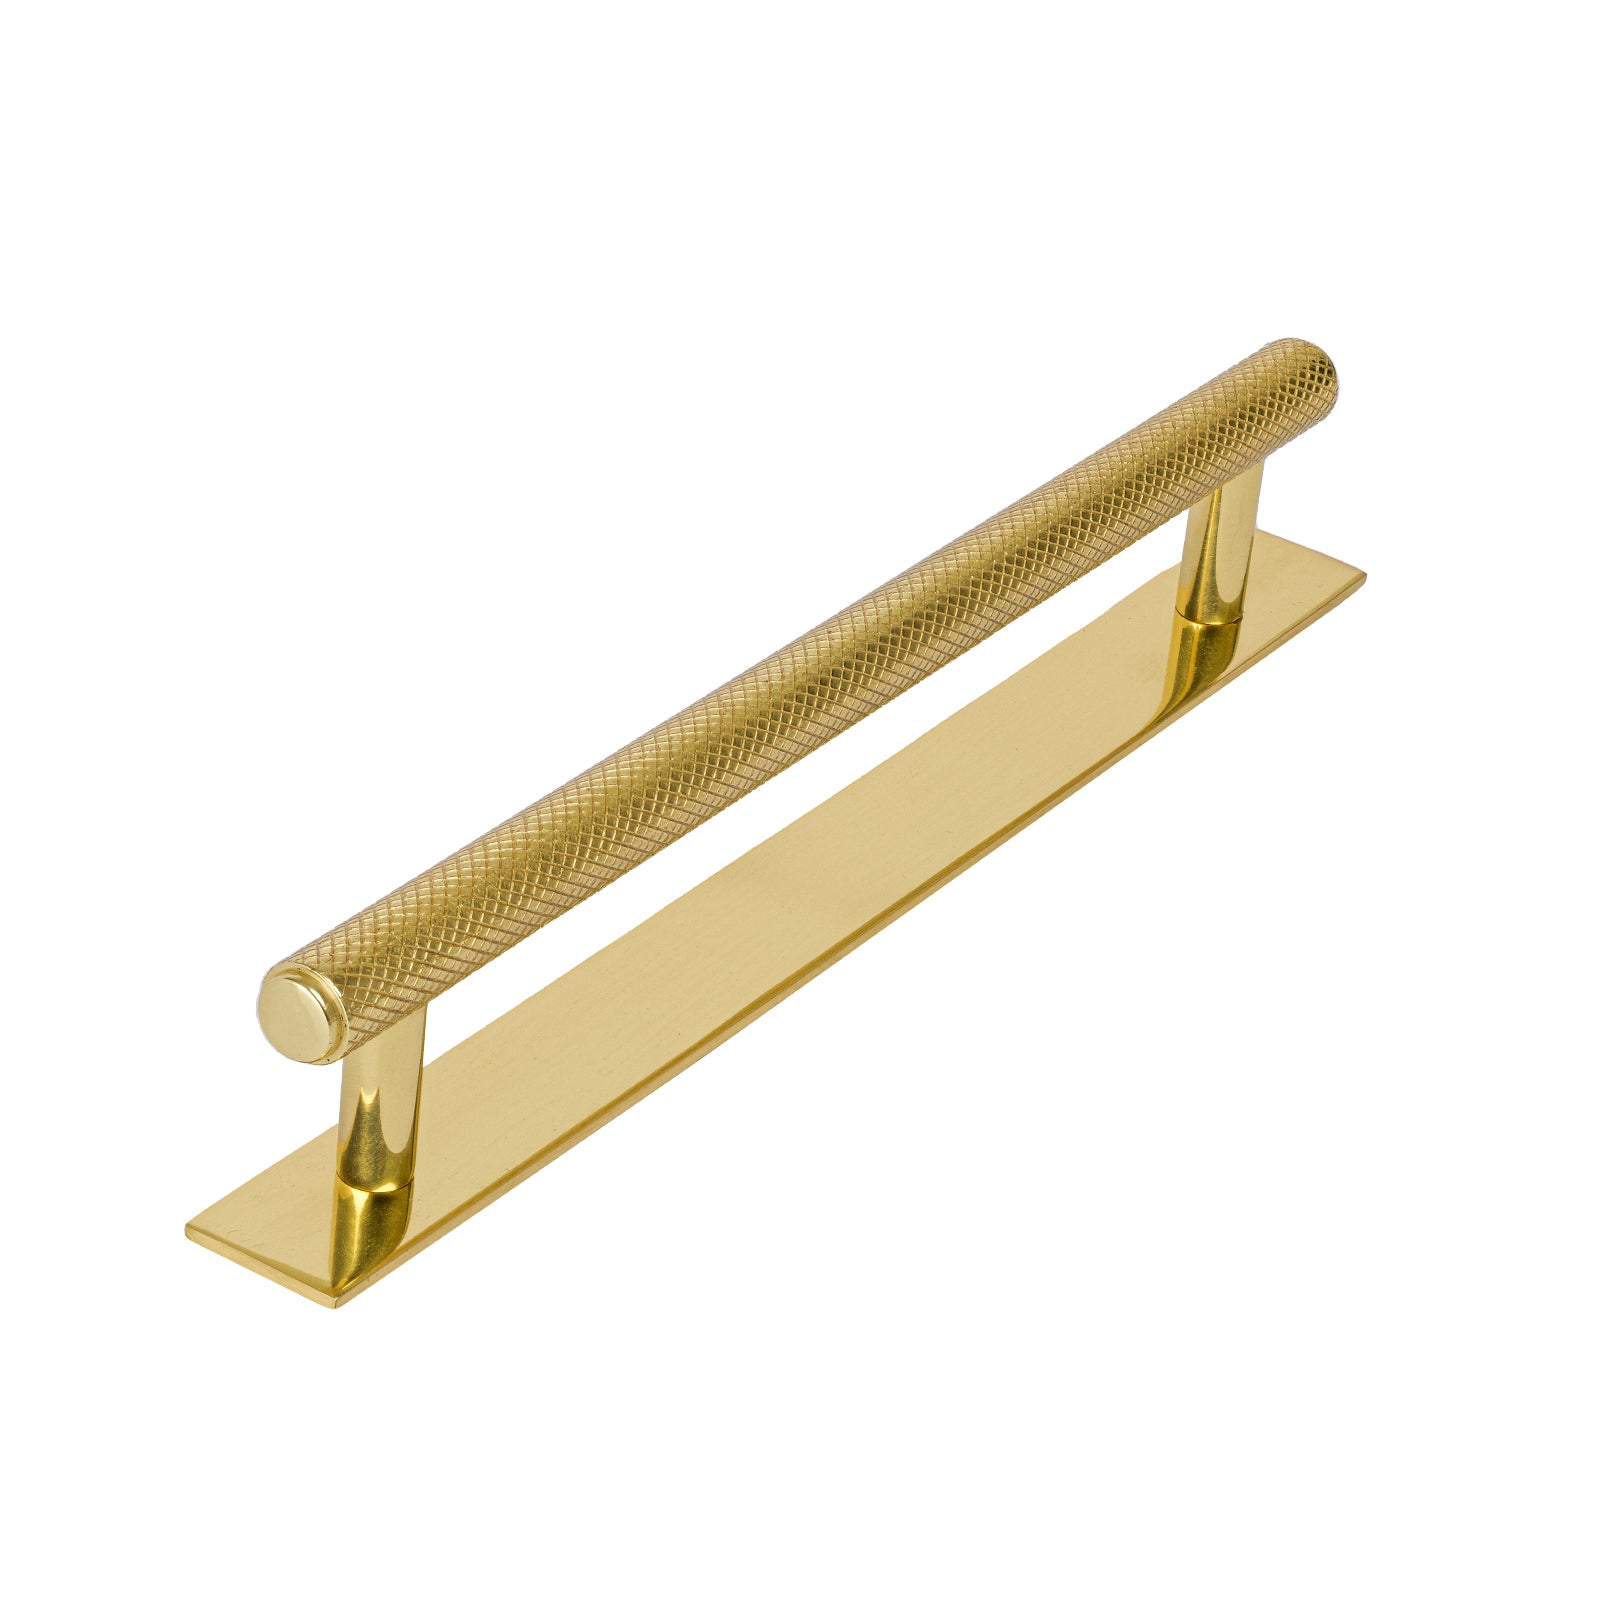 polished brass cupboard handles, large knurled pull handle, kitchen pull handles on backplate